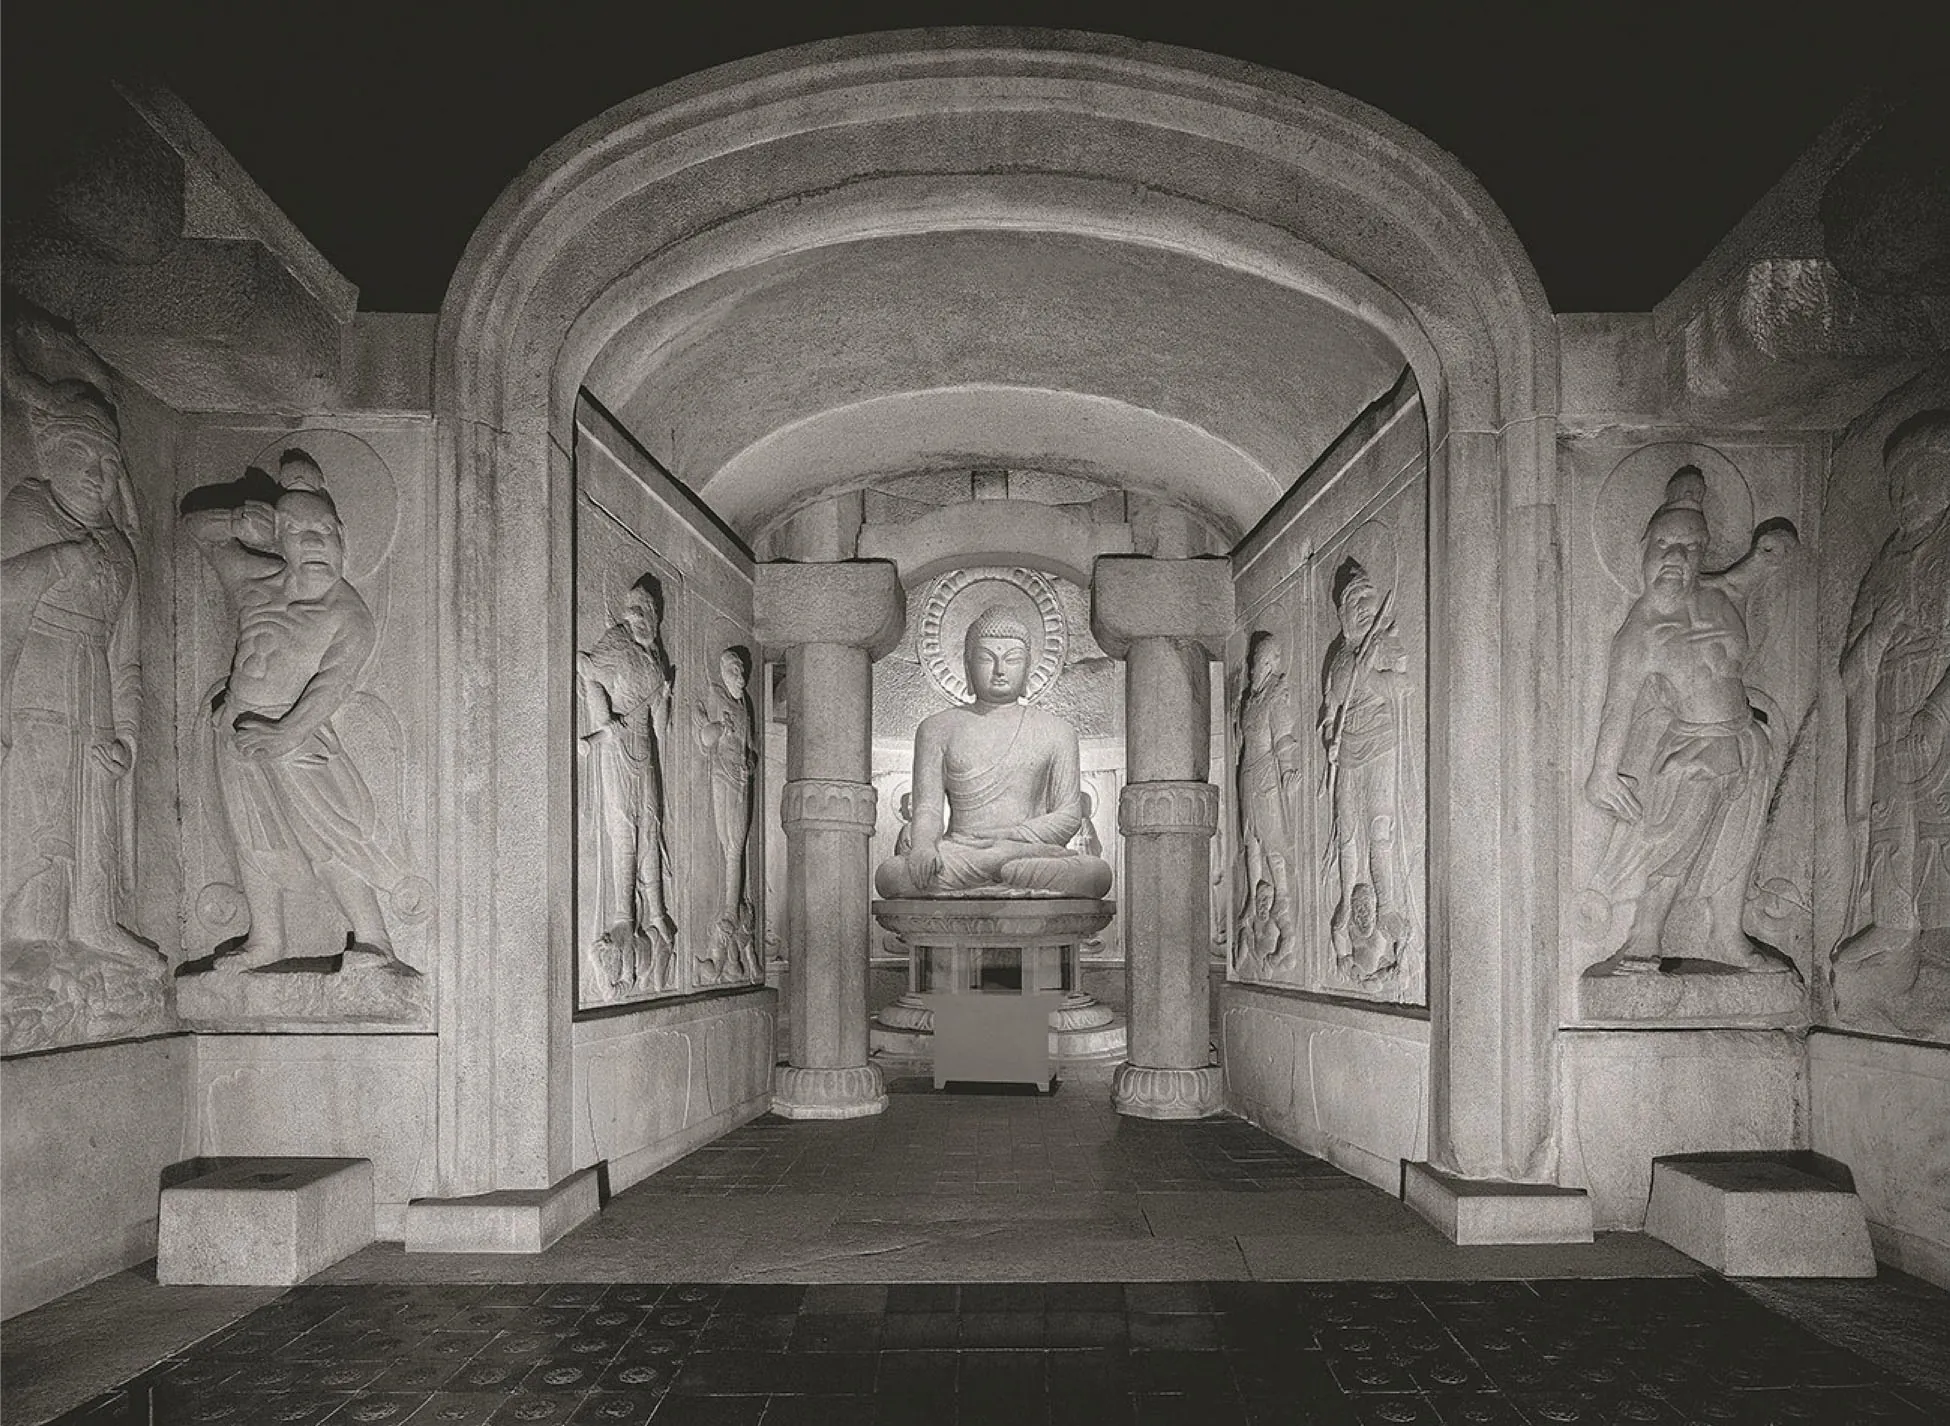 A photograph of the inside of a building with large carvings on the walls is shown. The floor is square tiled, gray in the back and black in the forefront. A large cross-legged statue is shown on a round, intricately carved pedestal in the far back recess of the room. He has closed almond shaped eyes, a hat on his head, and robes that hang off one of his shoulders. His right leg sits on top of his left leg and his arms rest on his legs. A halo is carved in the wall above the figures head and the walls are decorated with other carvings. A decoratively carved column stands in front of either side of the statue. The walls that come forward in the hallway are gray stone with a round arced ceiling. Two figures are carved on each wall of figures in long robes holding objects in their hands. The open room in the forefront of the photo is larger than the hallway and has two figures carved on each wall. The figures are clad in long robes, hats and hair up on their heads, and stand in various poses.